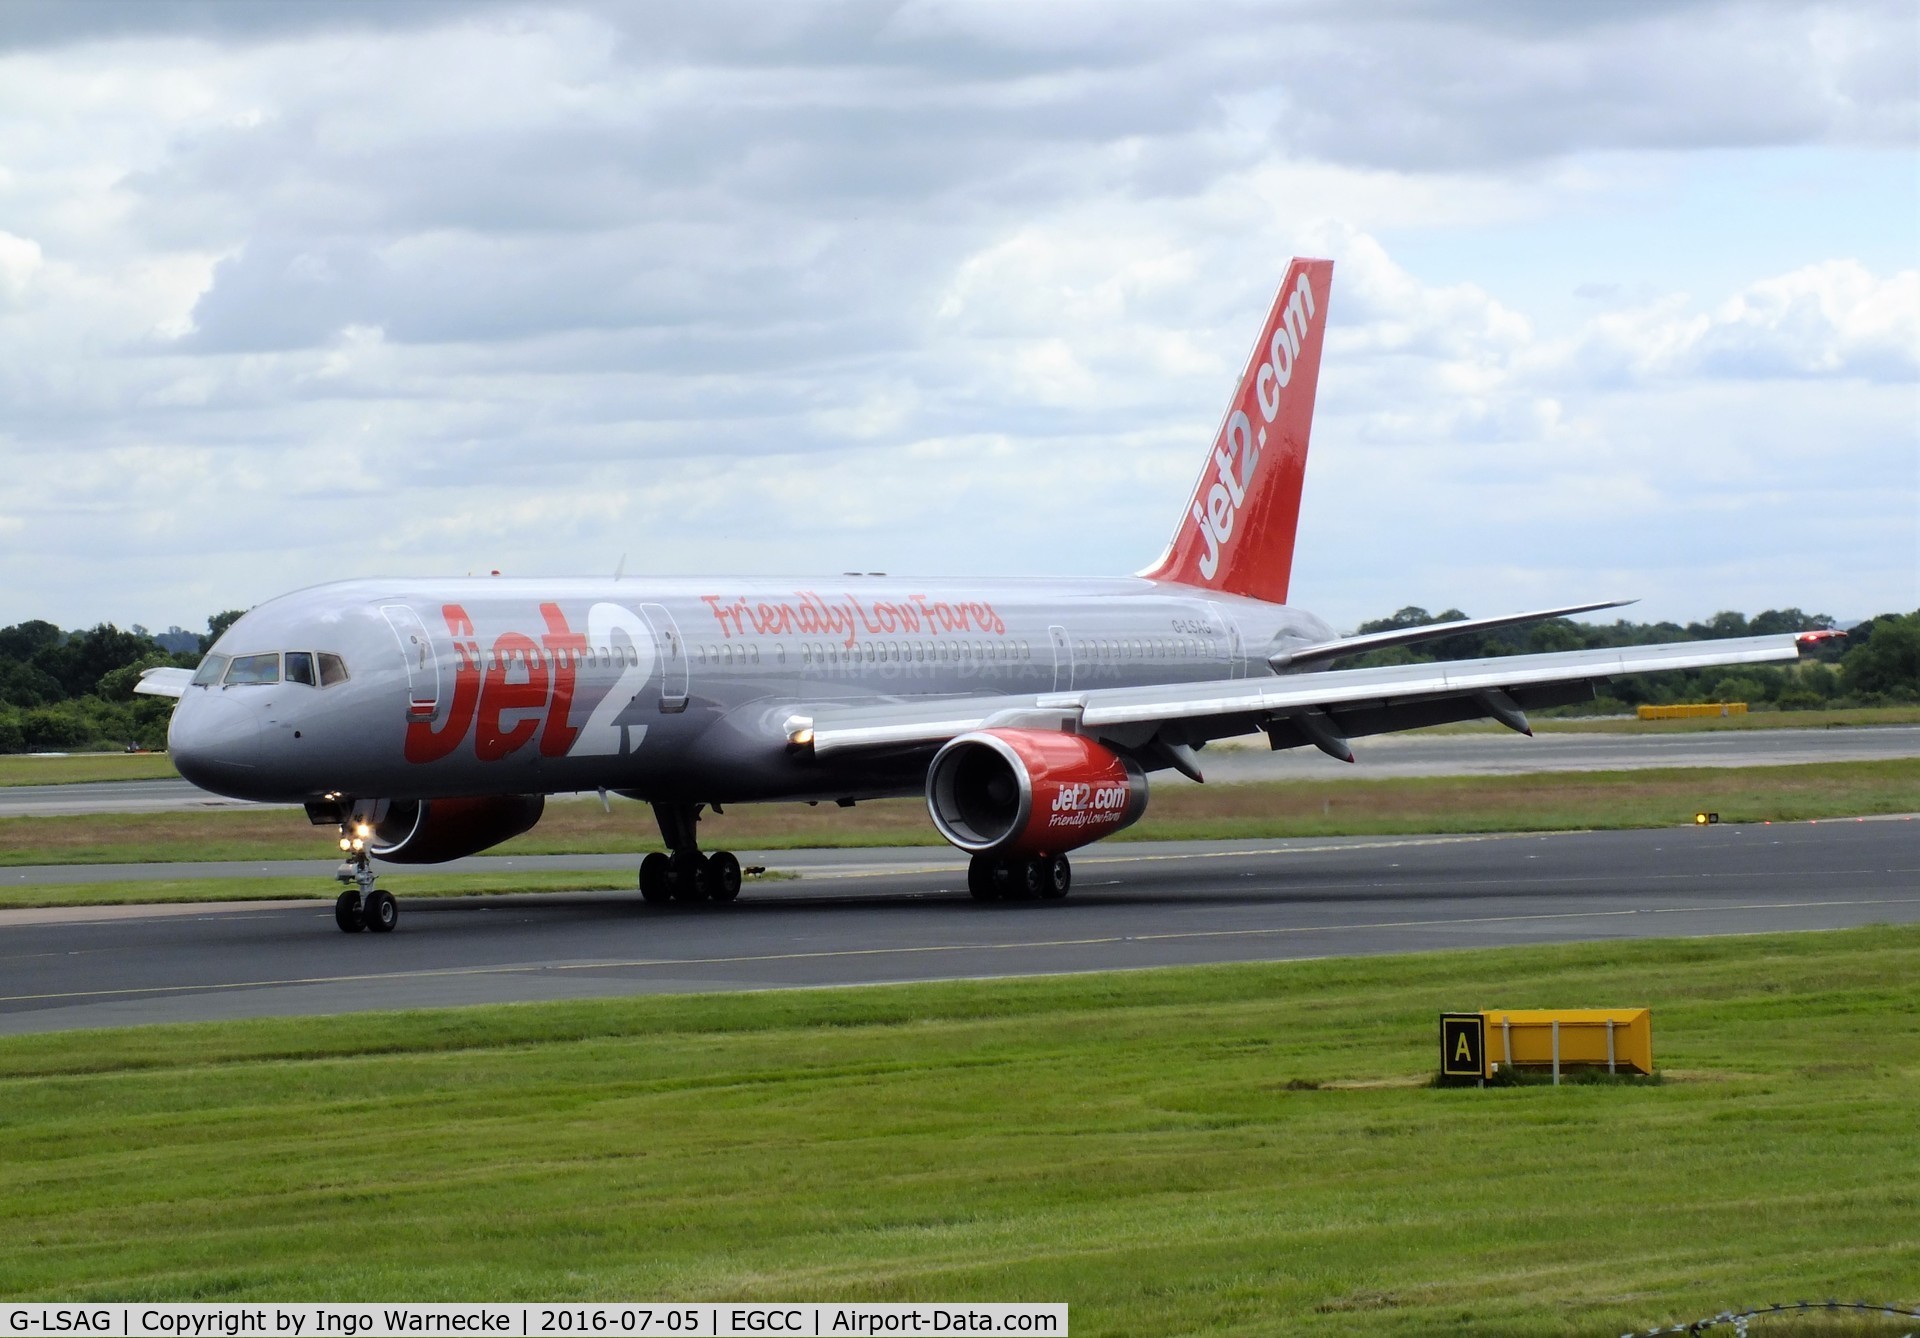 G-LSAG, 1987 Boeing 757-21B C/N 24014, Boeing 757-21B of jet2 at Manchester airport